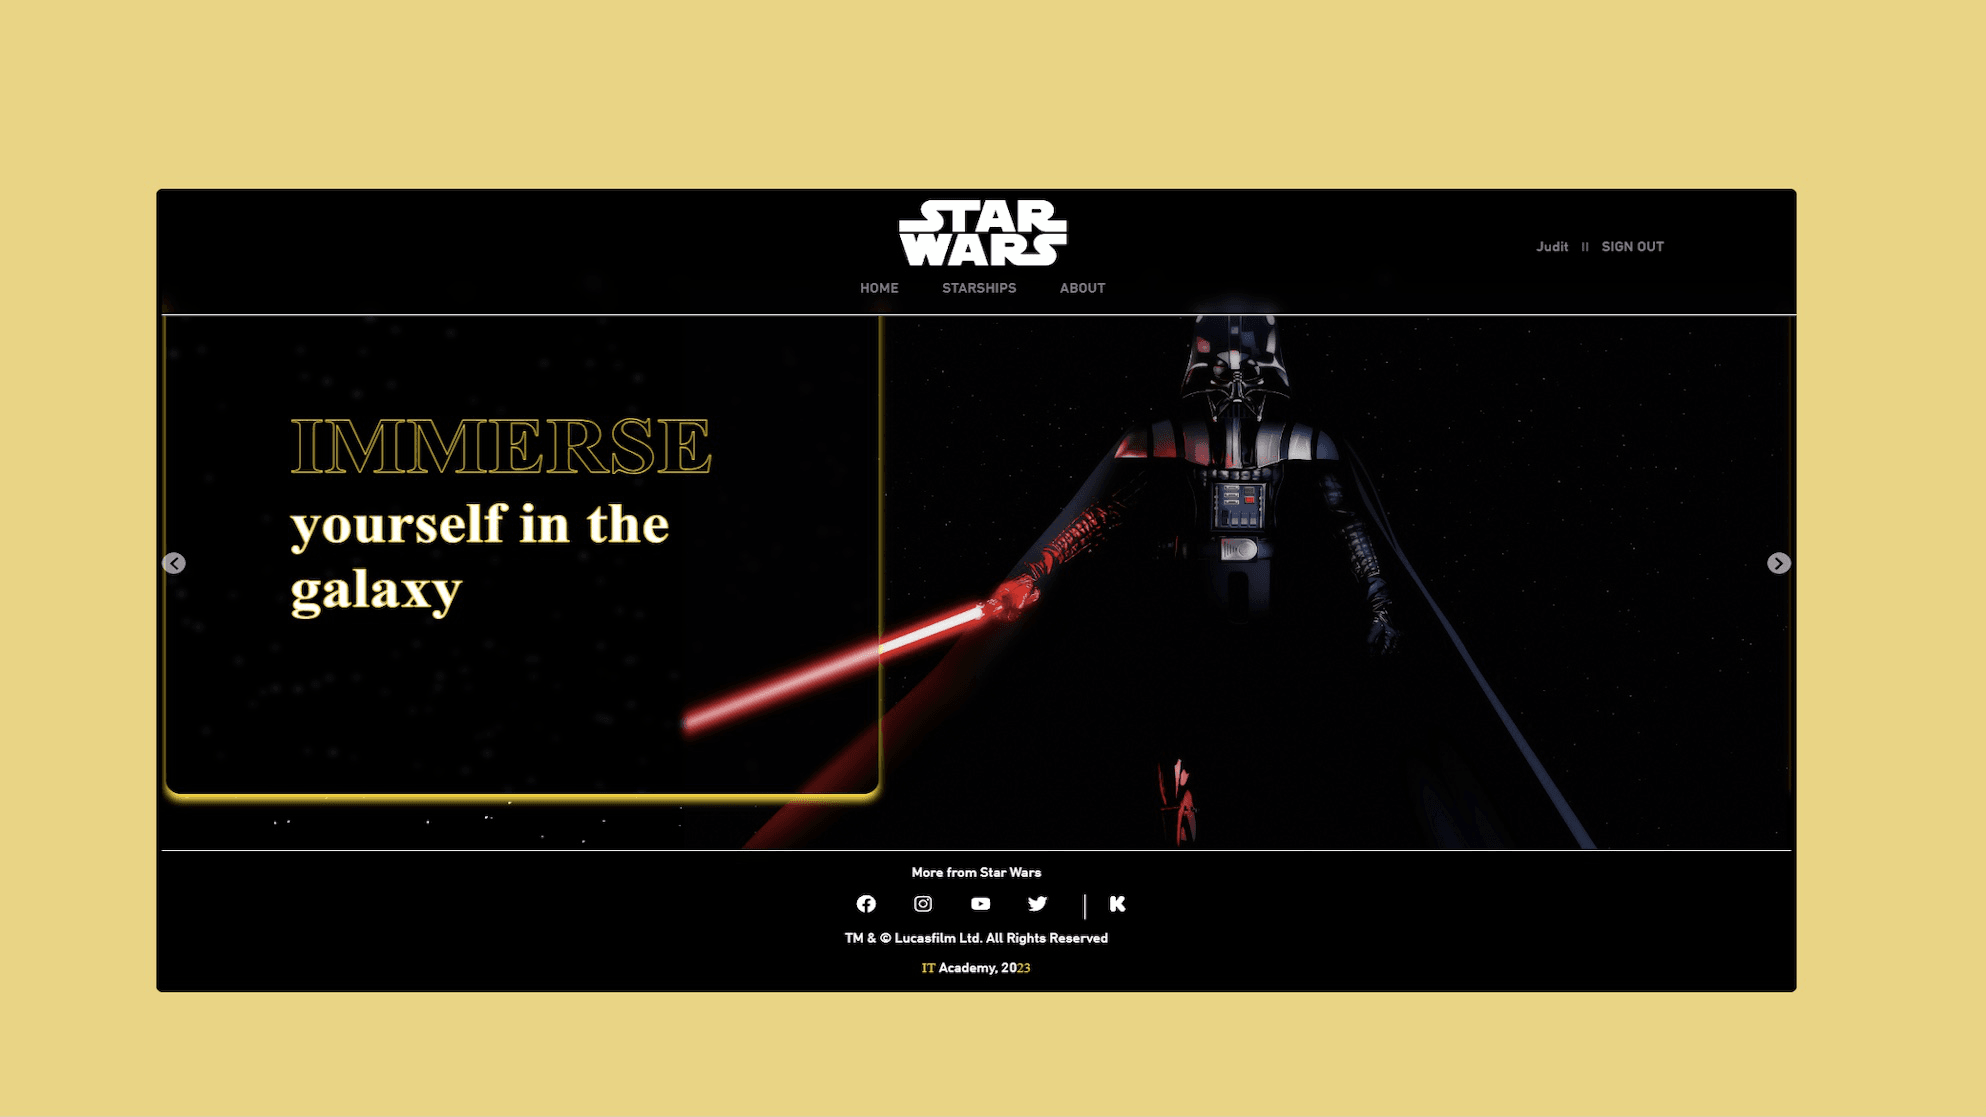 Showcase image for Star Wars Application